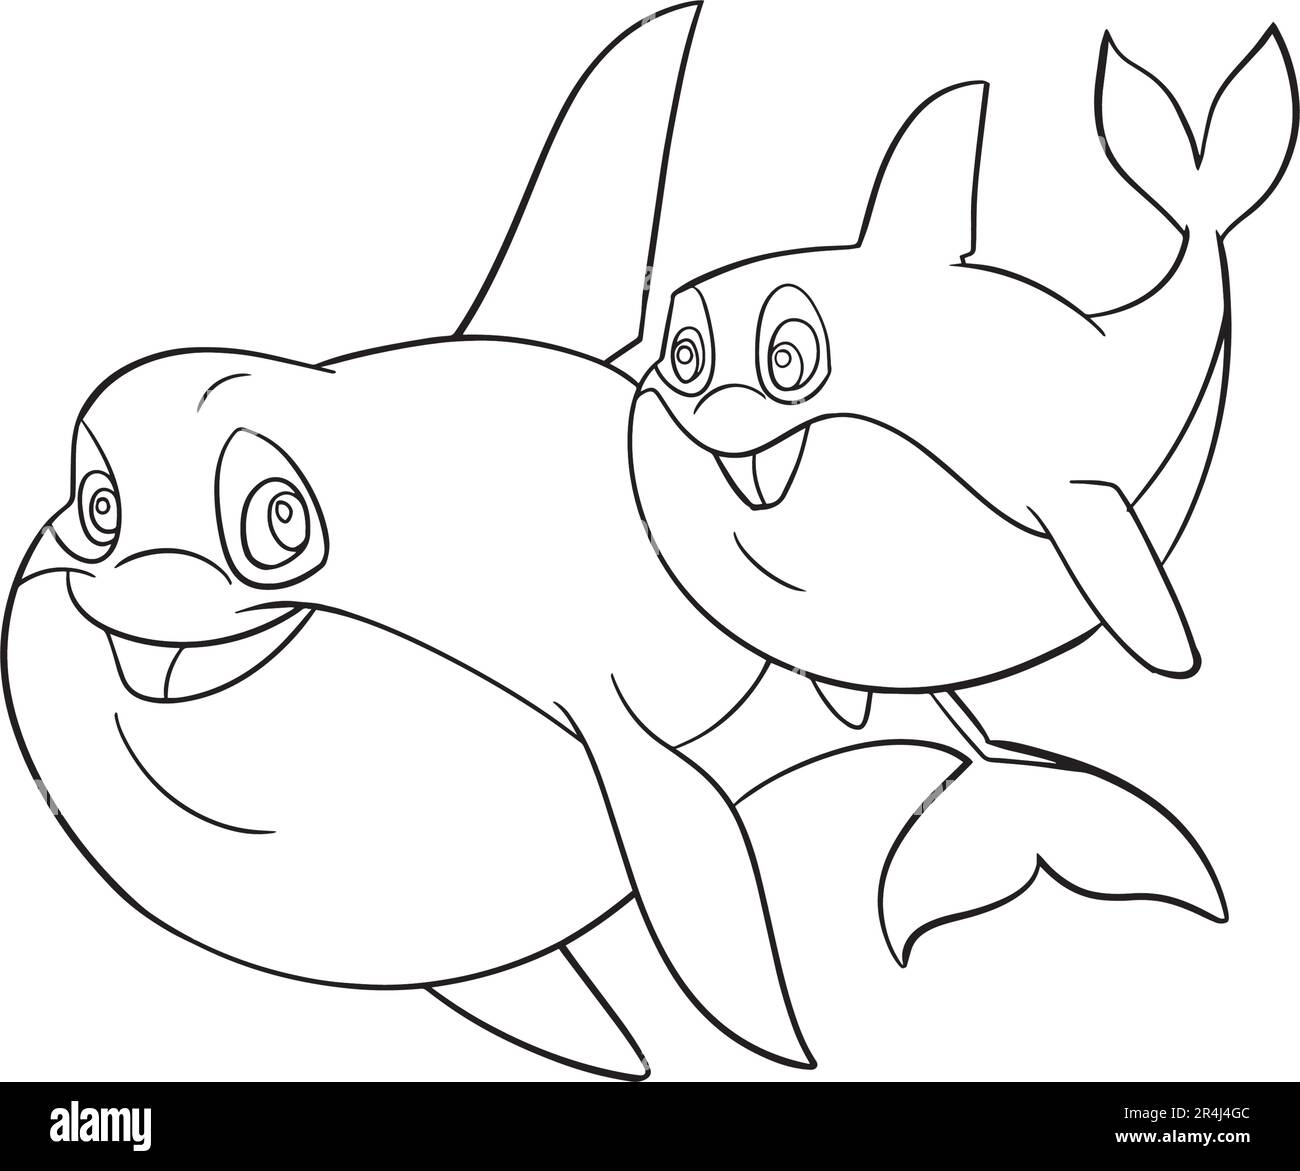 Sea animals group coloring page. Ocean fish, octopus, dolphin, shark, whale, turtle and crab. Doodle style. Outline vector illustration for coloring Stock Vector